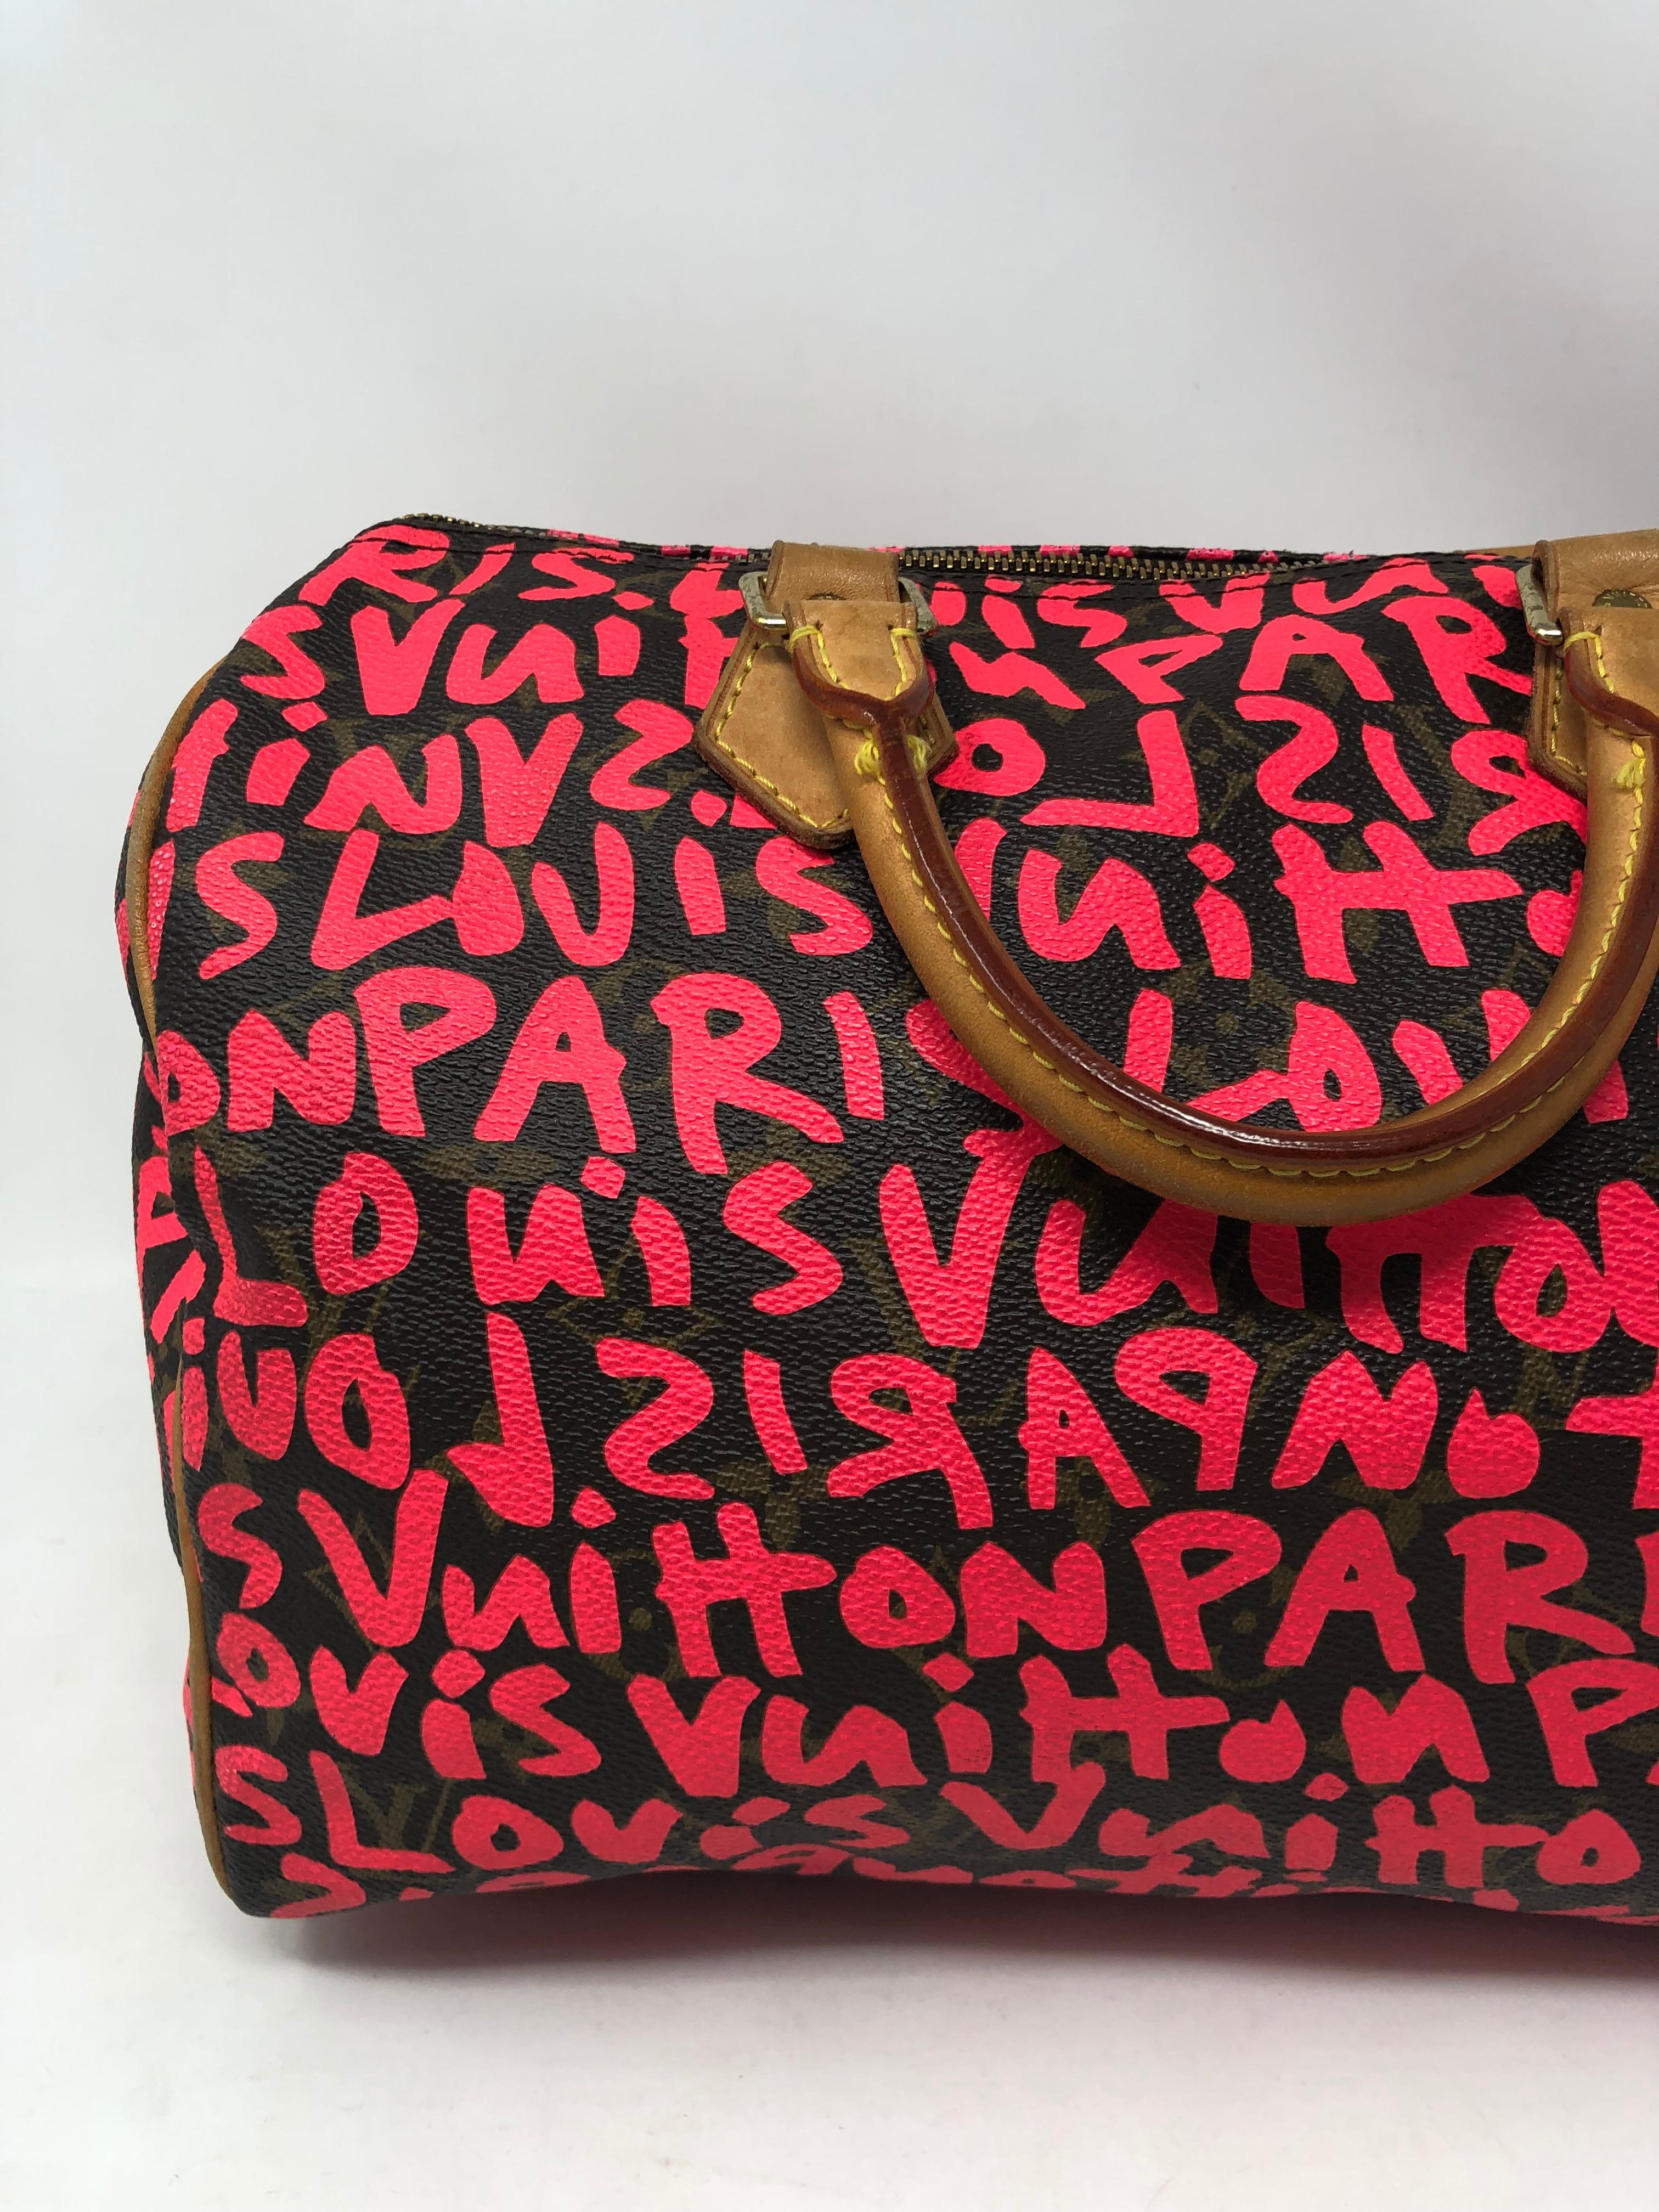 Louis Vuitton Speedy 30 designed by Stephen Sprouse. Iconic Graffiti Bag. Hot pink LV graffiti over monogram coated canvas. A classic meets rebellion. Don't miss out on this one. Guaranteed authentic. 